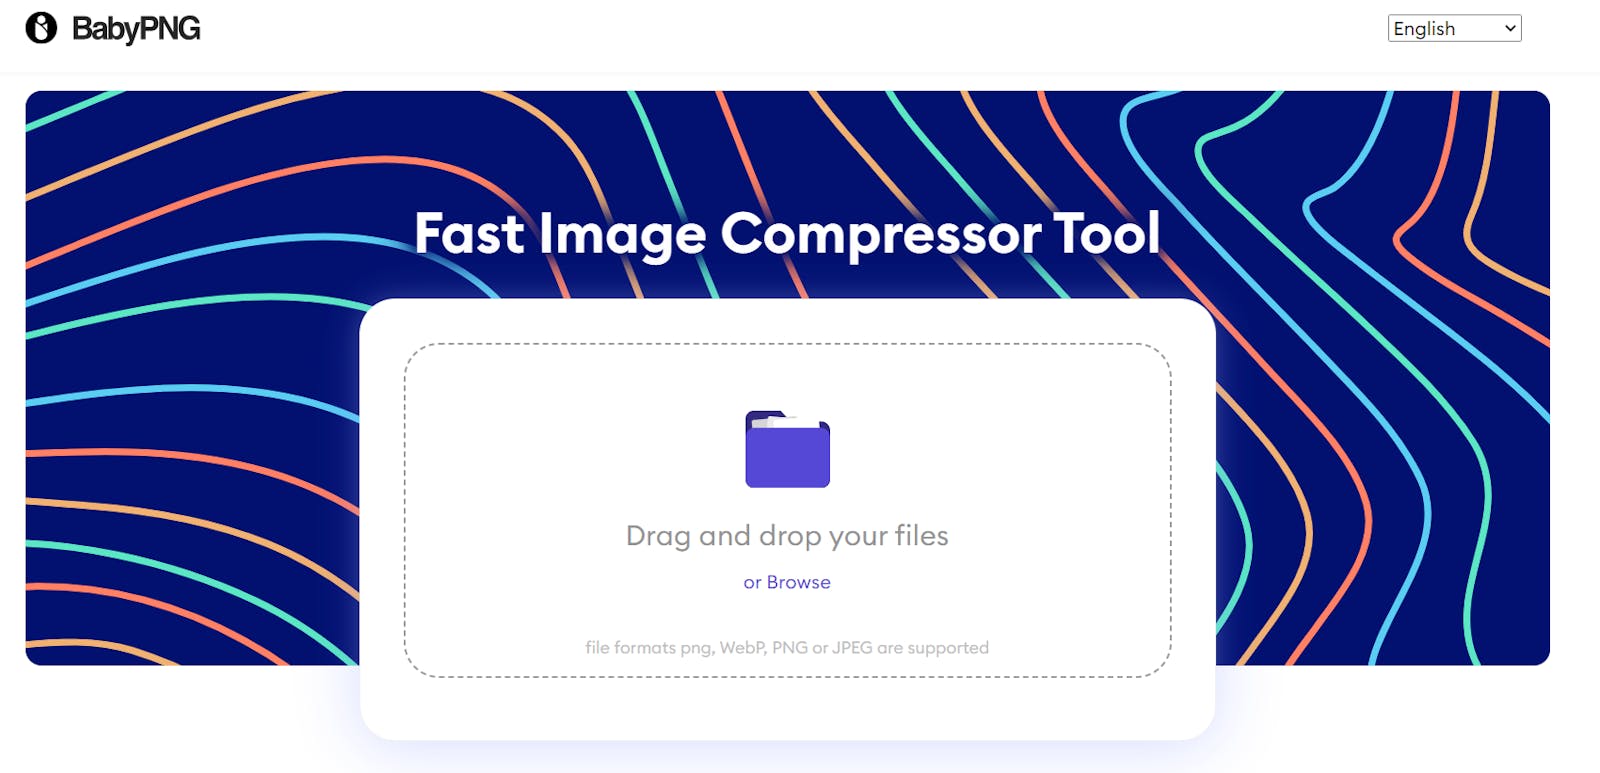 Compressing Images Made Easy with BabyPNG